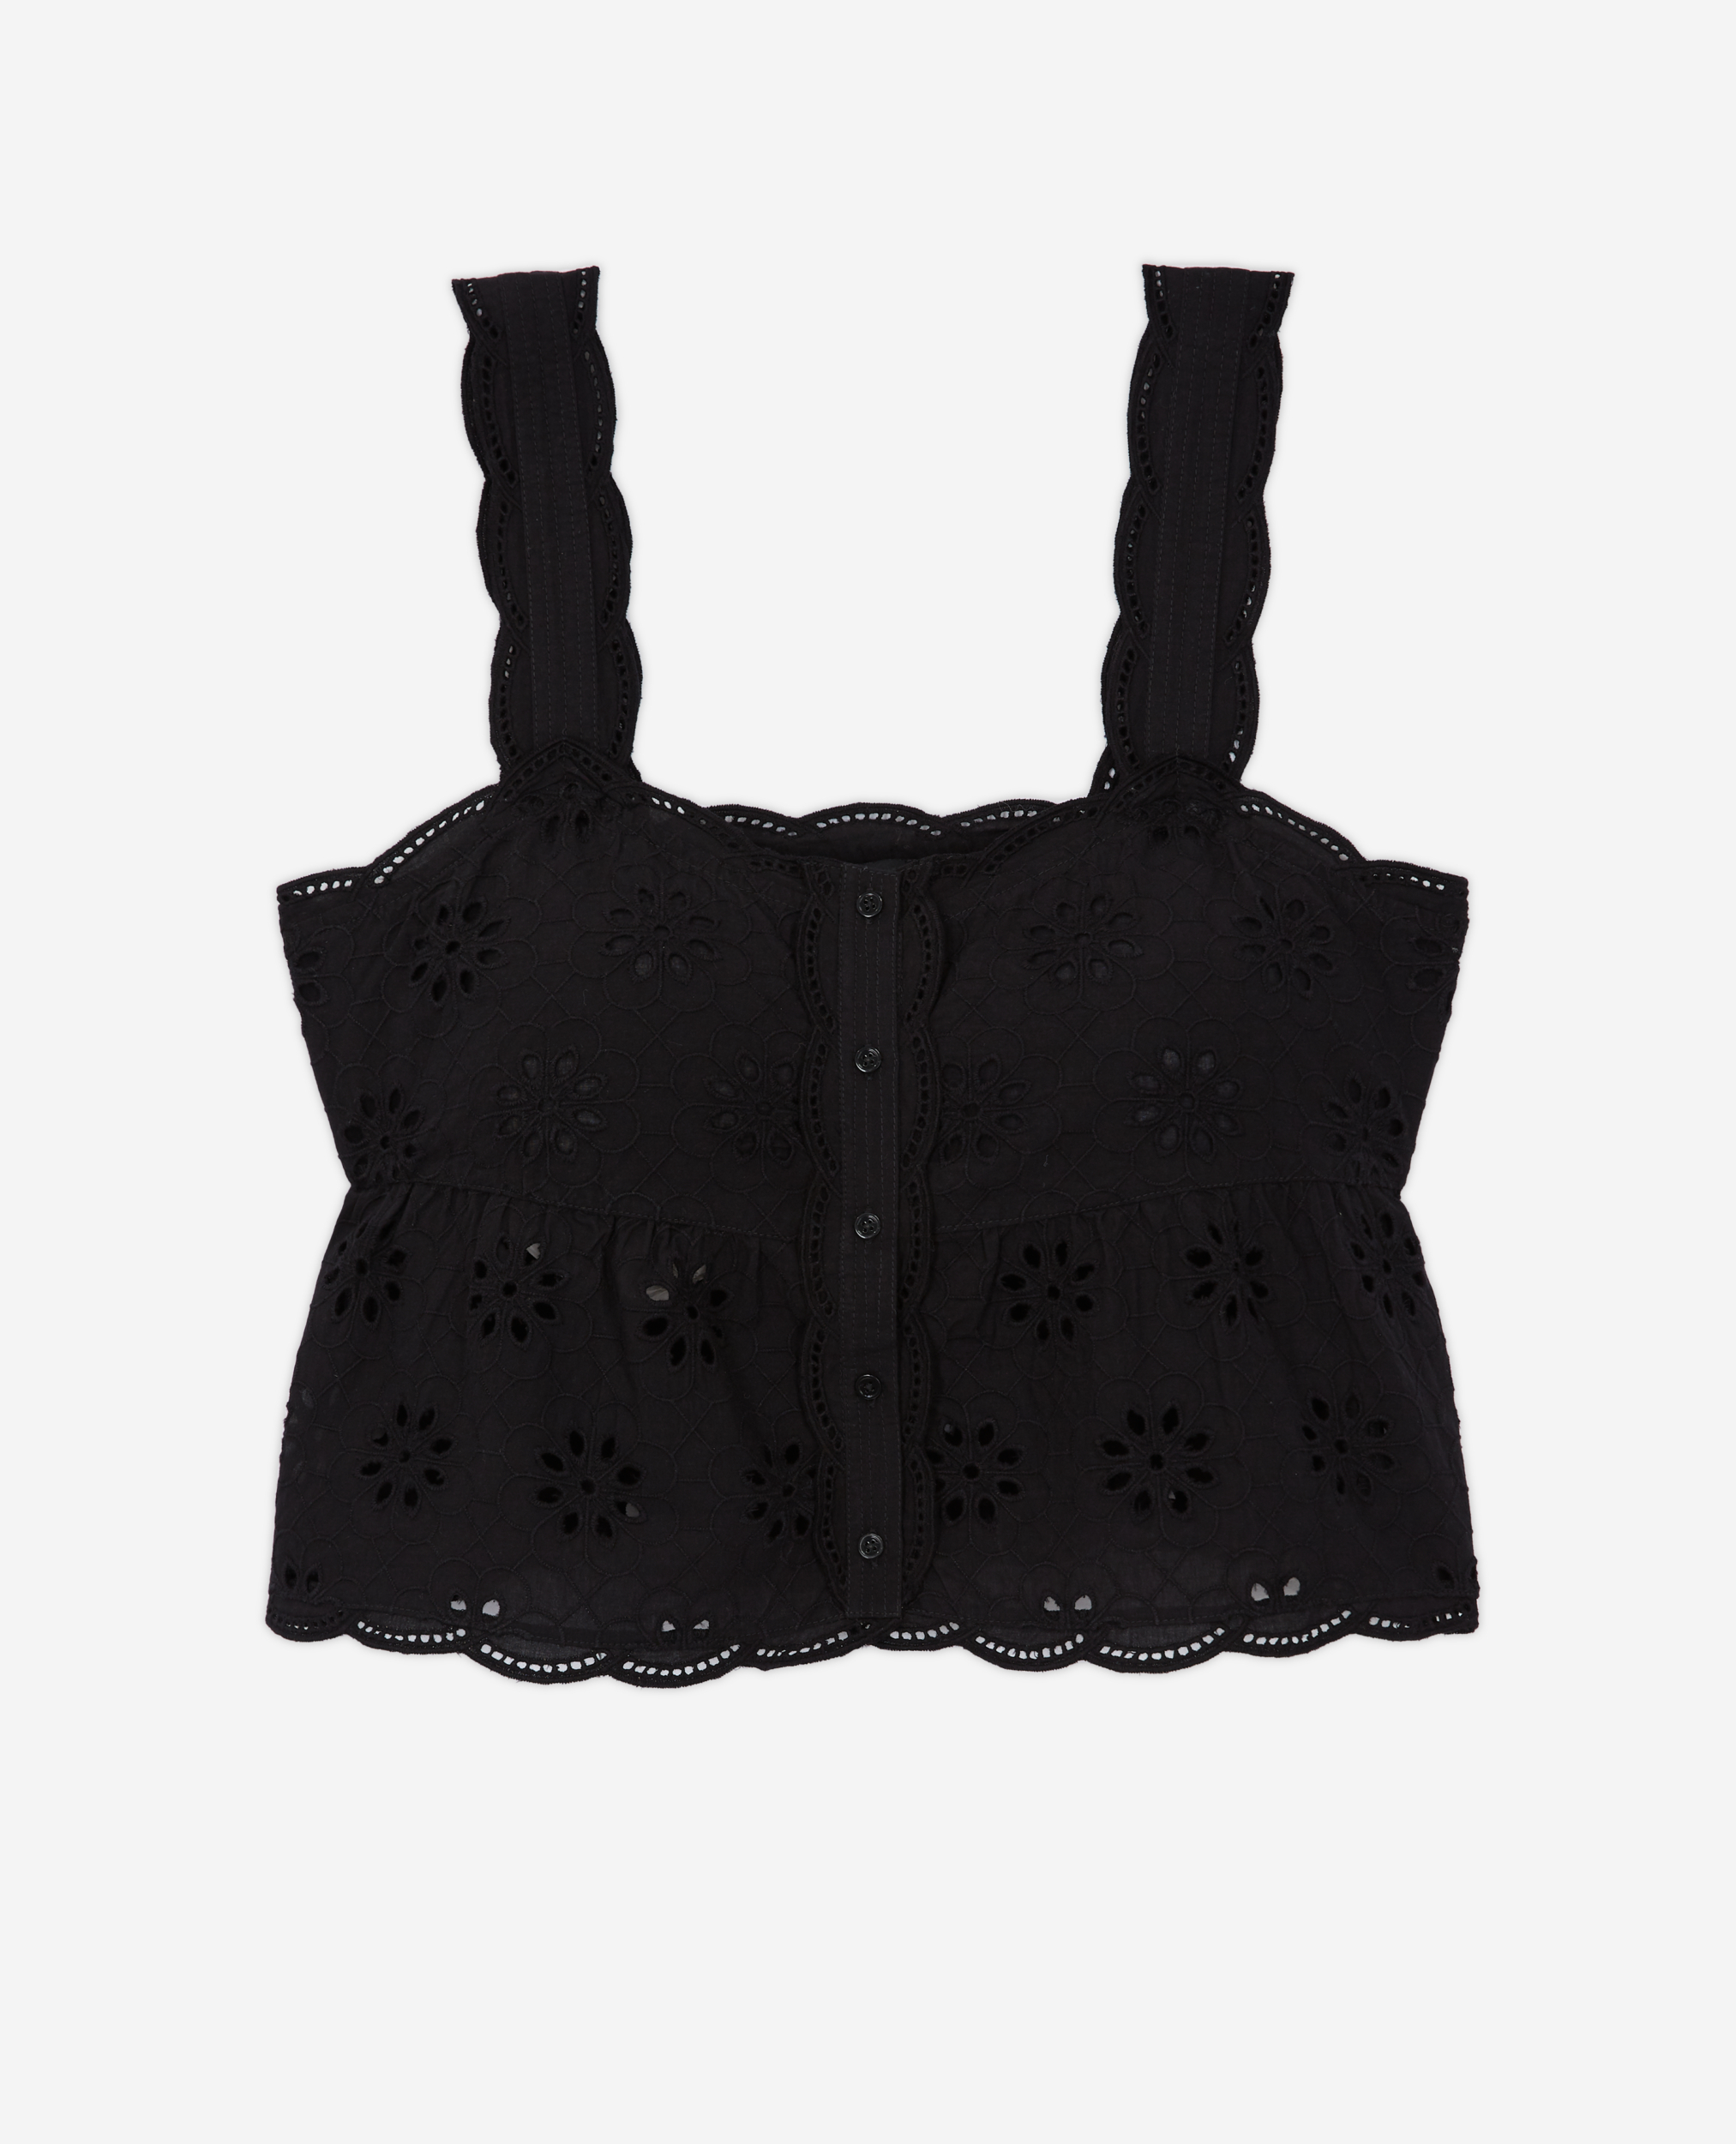 THE KOOPLES SHORT BLACK TOP WITH BRODERIE ANGLAISE